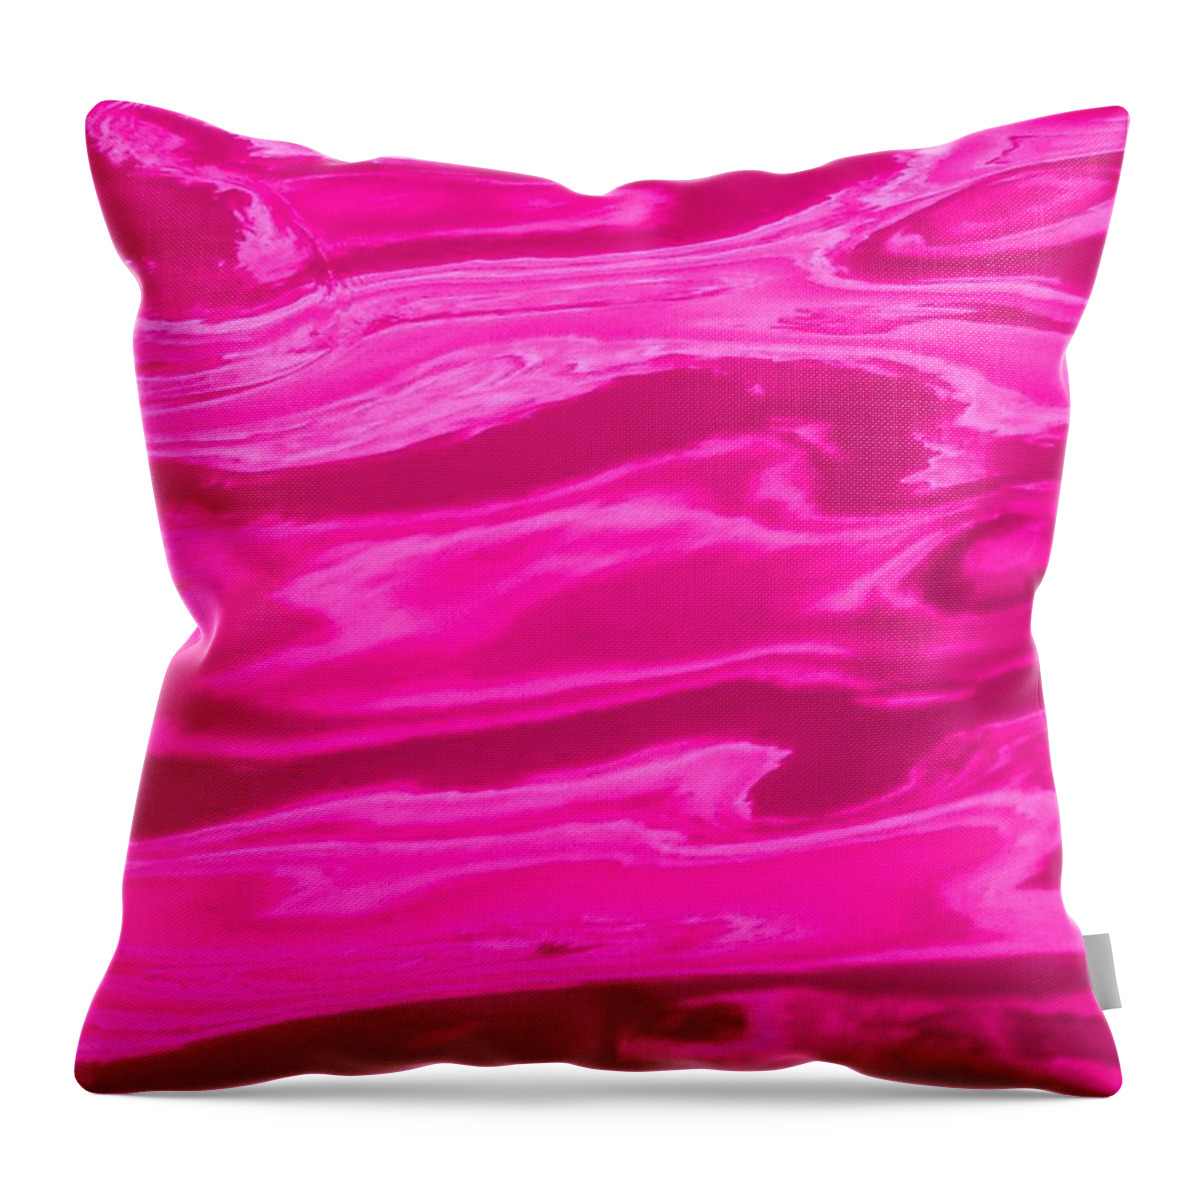 Multi Panel Throw Pillow featuring the photograph Colored Wave Maroon Panel Two by Stephen Jorgensen